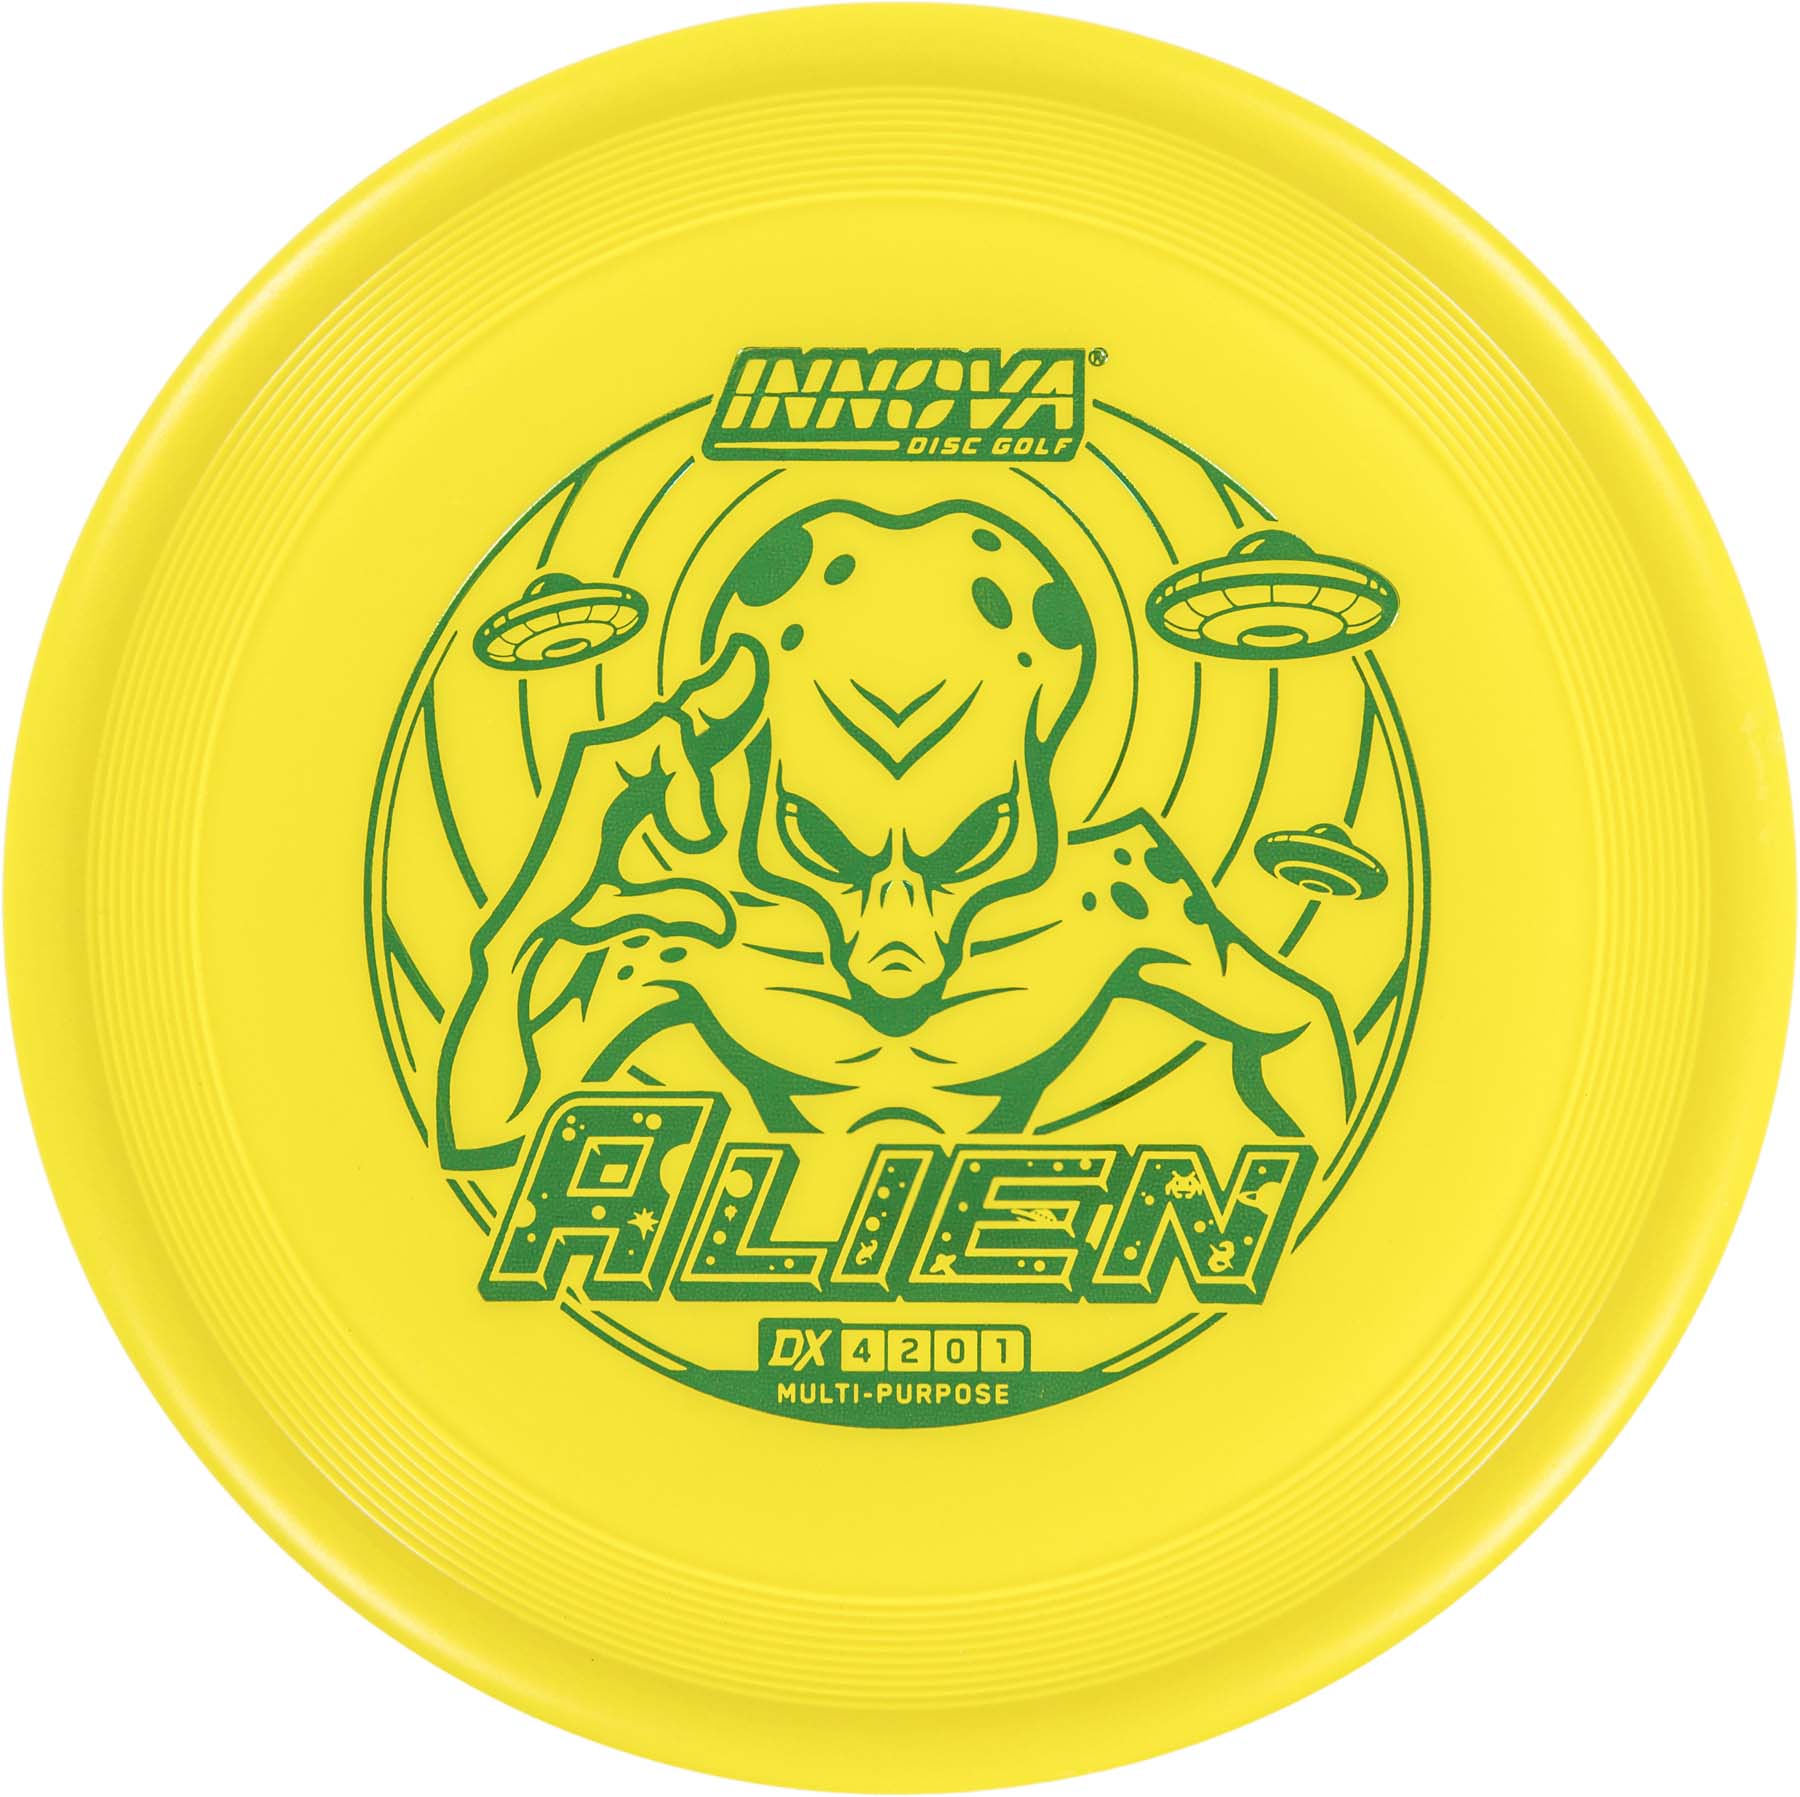 Nexus Alien - Multipurpose Disc With Excellent Grip. Yellow disc with green stamp.